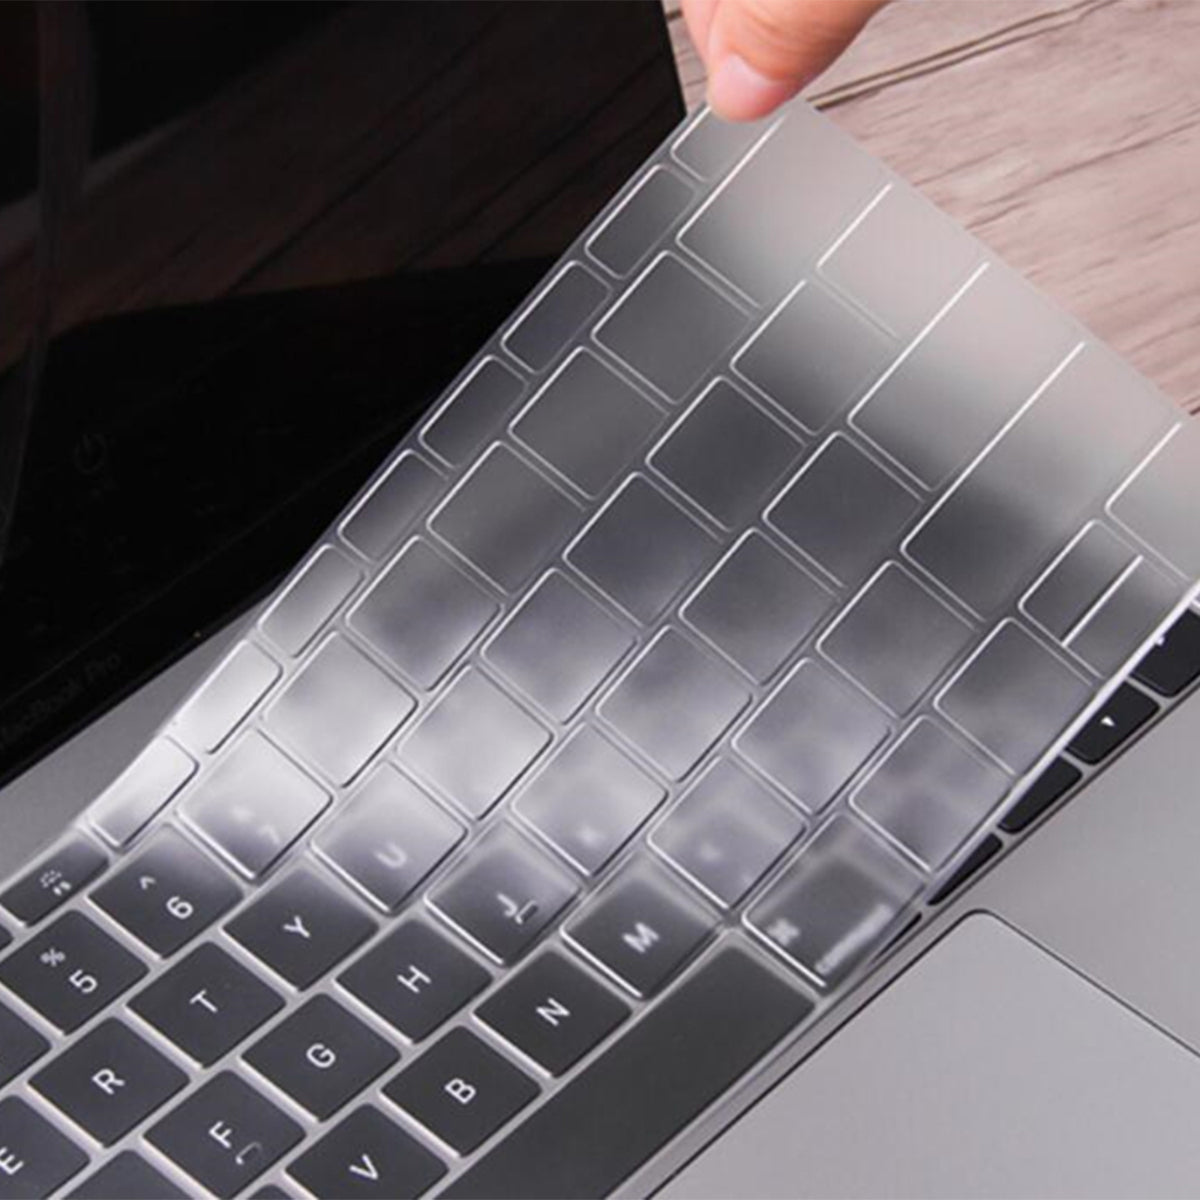 Lightweight Flexible Keyboard Cover Soft TPU Keyboard Protector for MacBook Air 11inch (A1370/A1465)